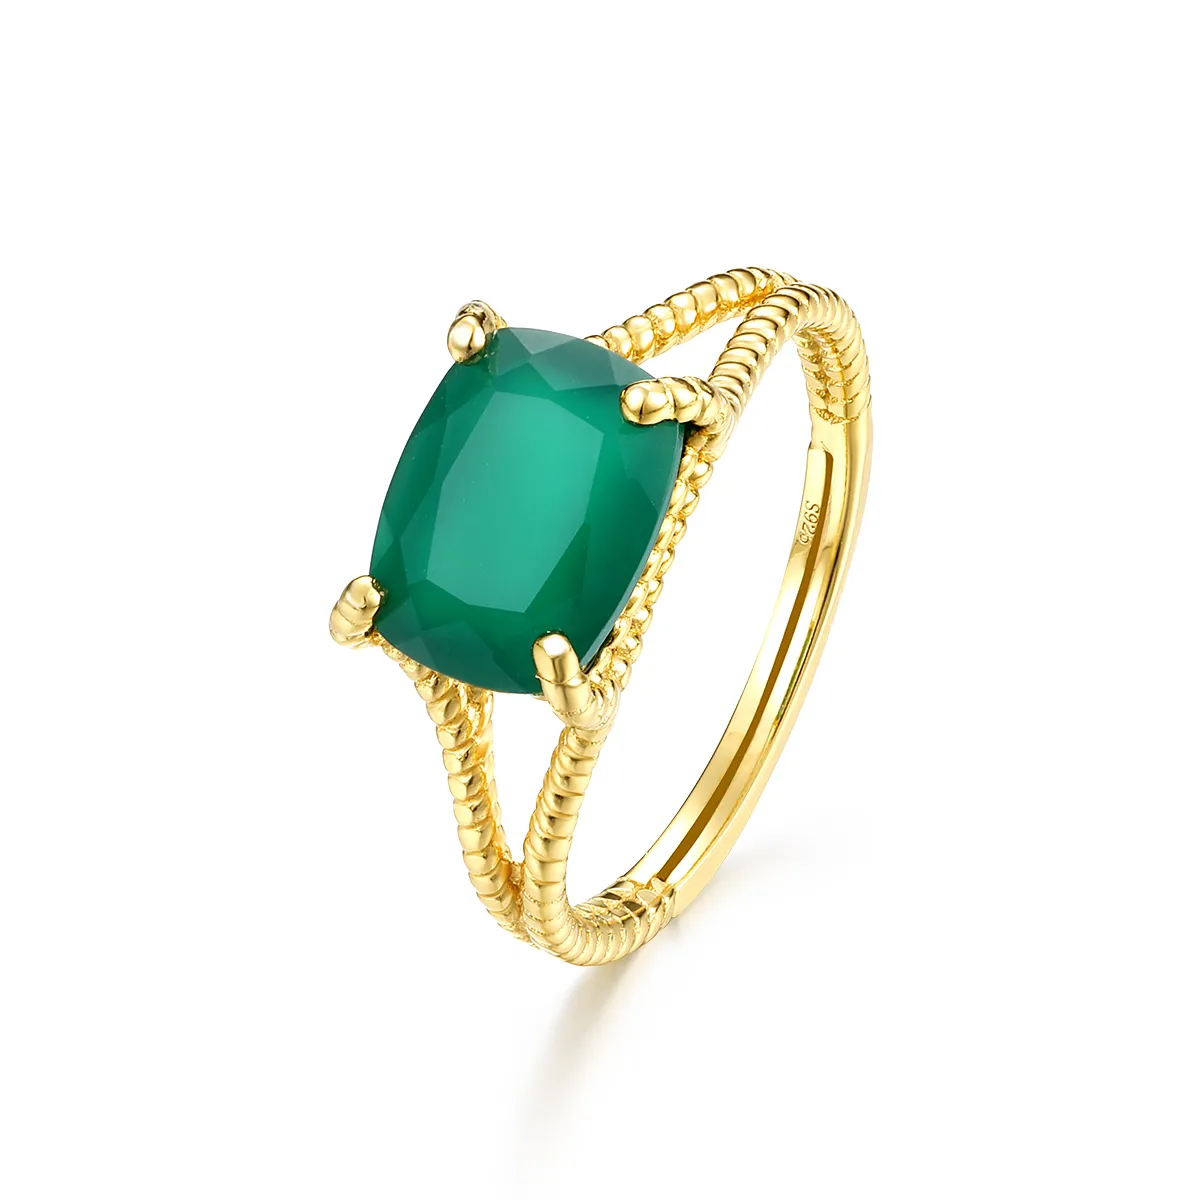 Wholesale Green Agate Ring 14K Gold Plated Adjustable Fashion Rings For Women Jewelry